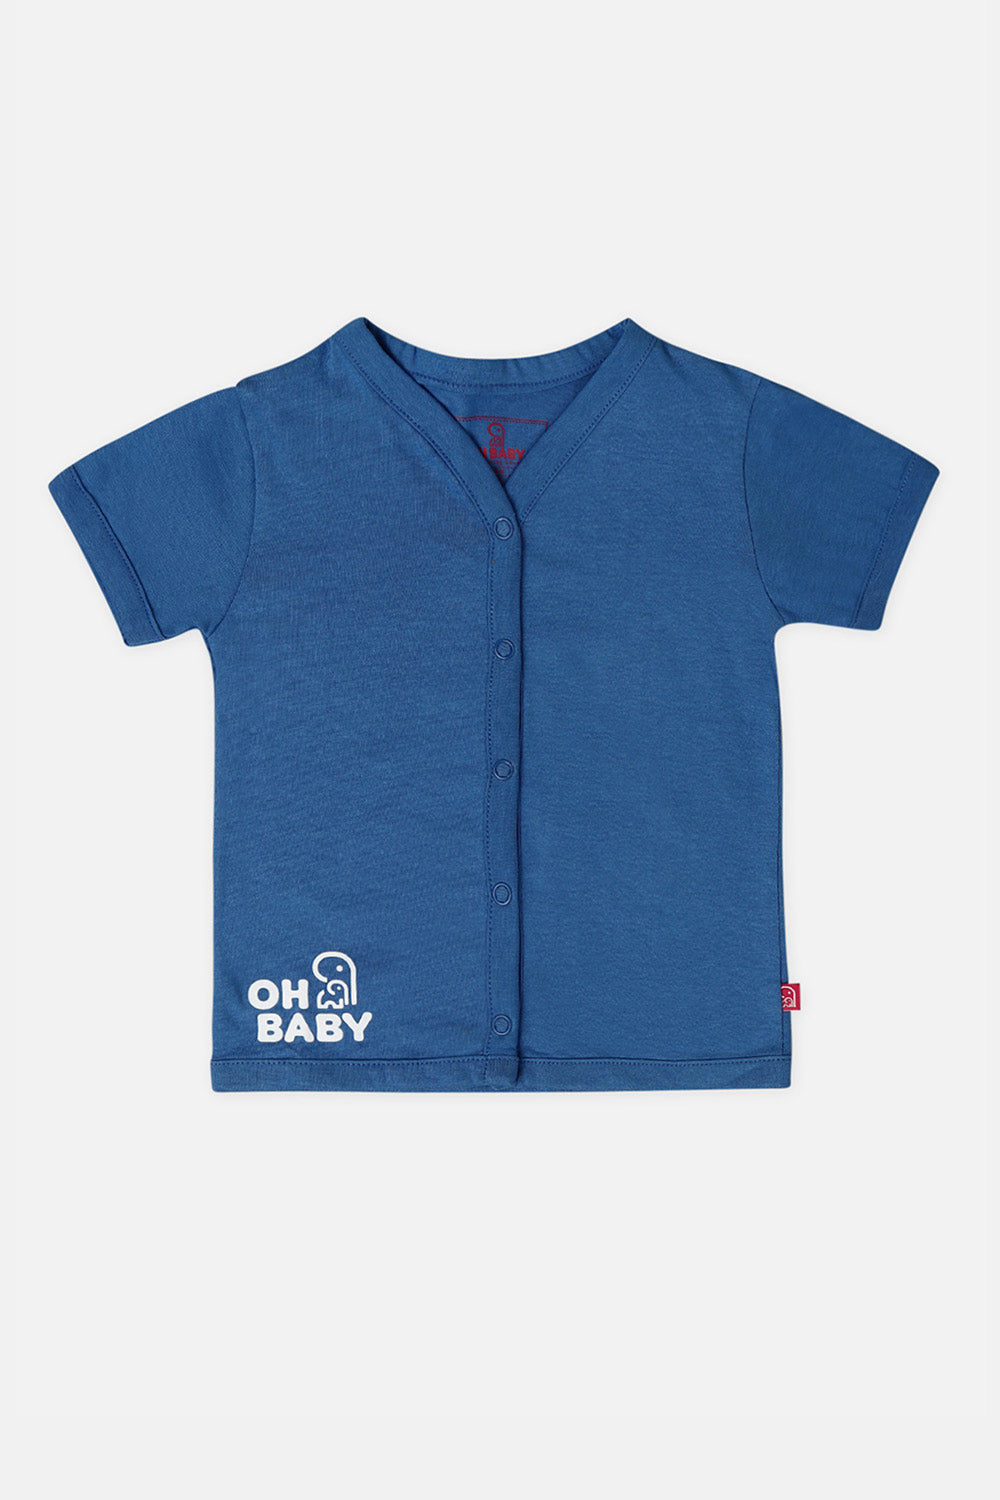 Oh Baby T Shirts Front Open Blue-Ts20